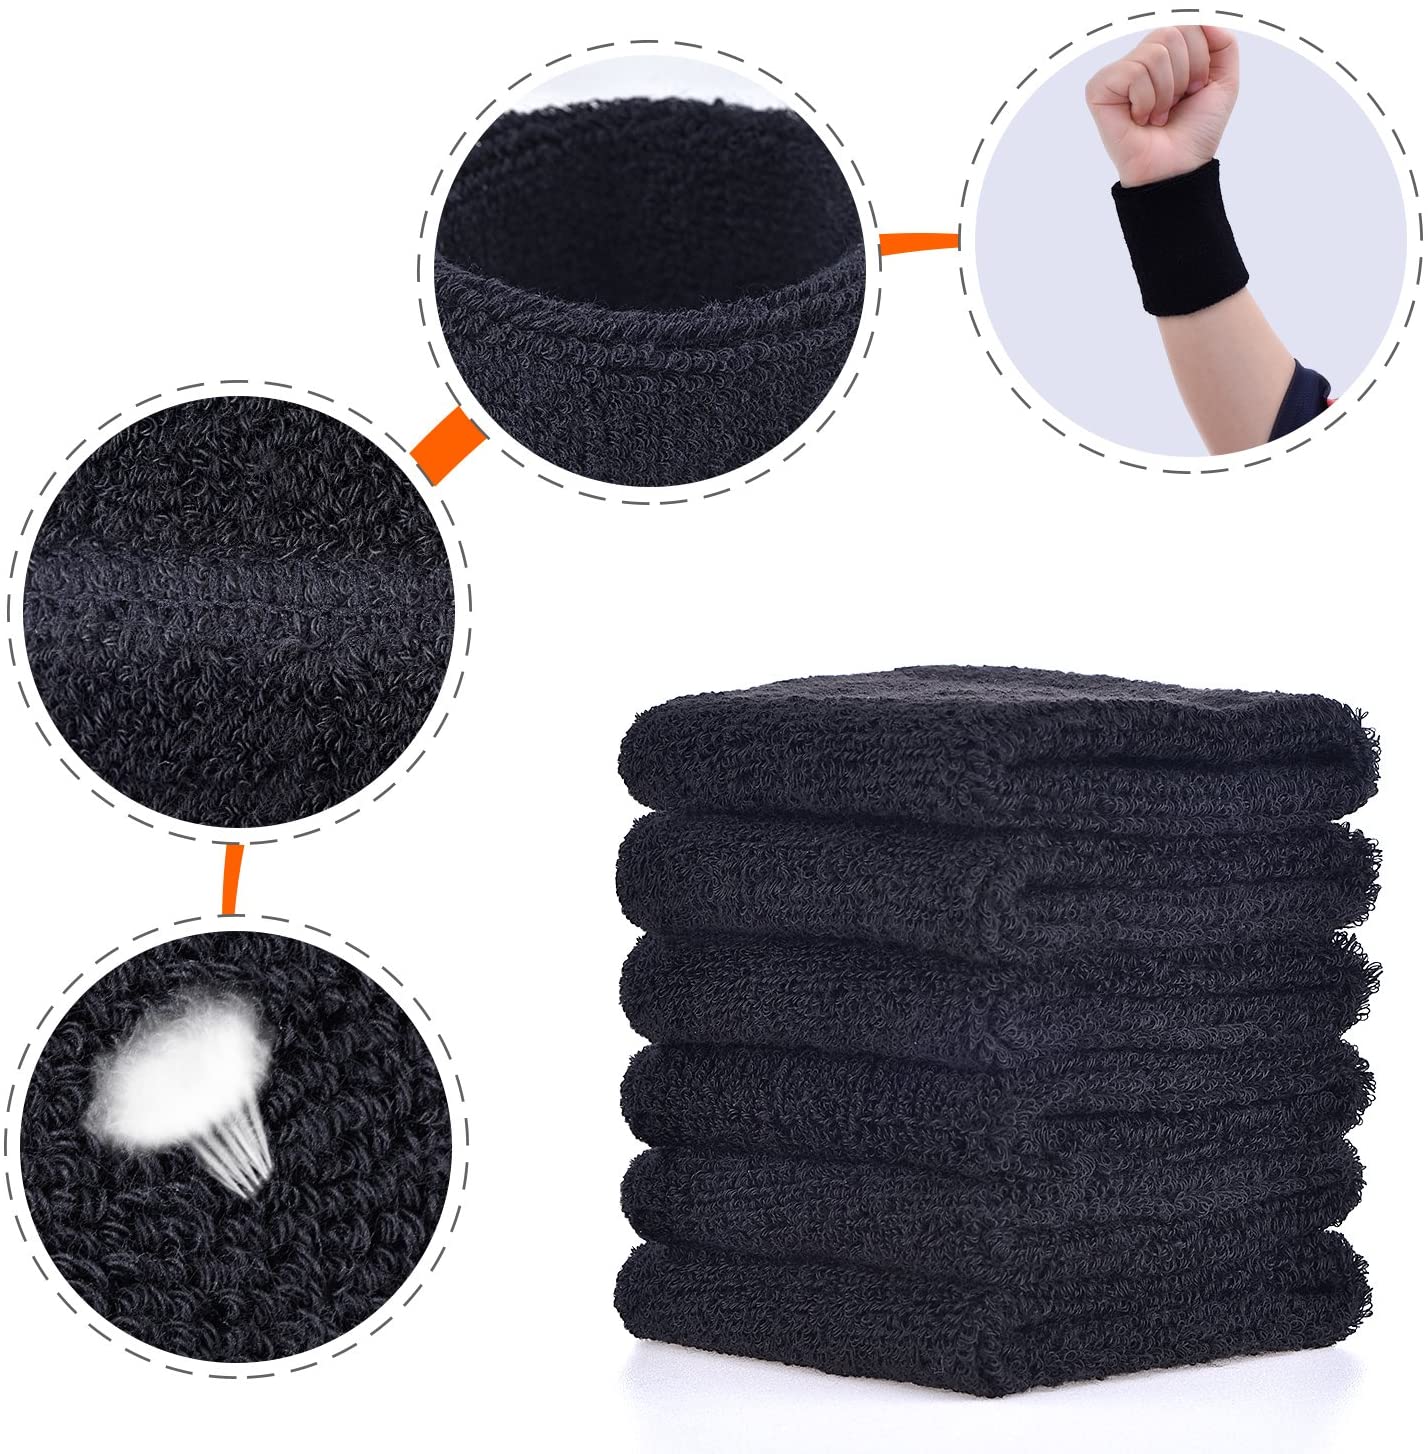 6 Pack Sports Wristbands Absorbent Sweatbands for Football Basketball Running Athletic Sports